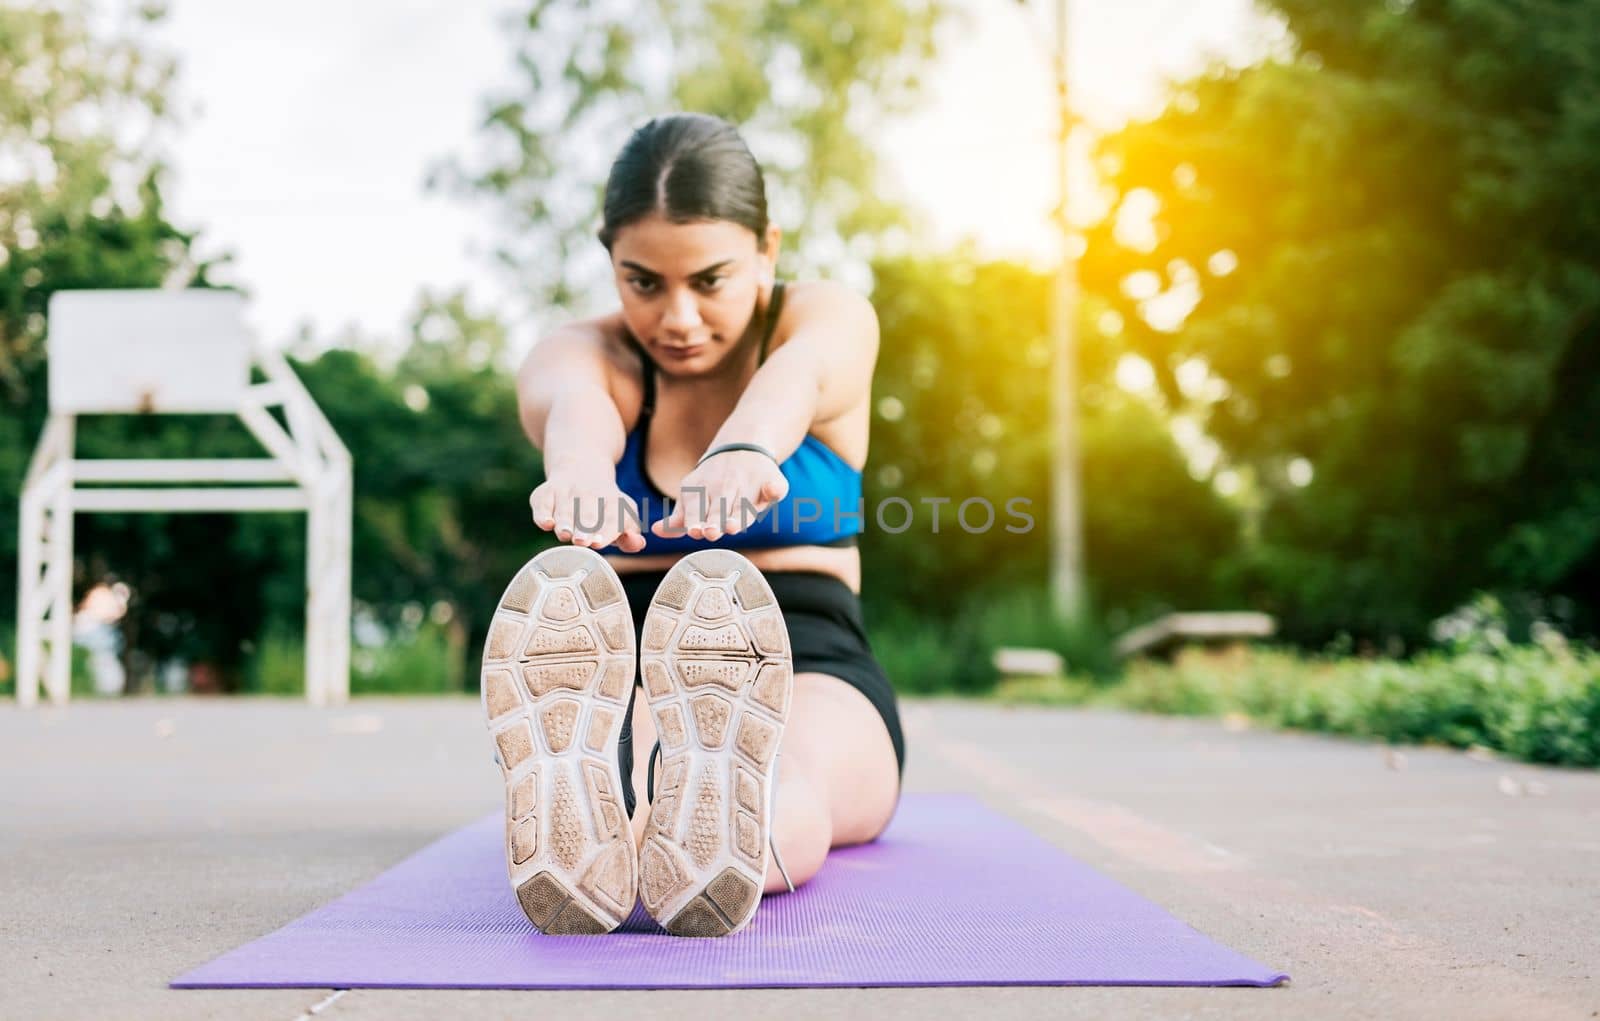 Athlete woman sitting doing leg stretch in a park. Athlete girl sitting on a mat stretching her legs in a park, Sporty girl stretching her legs sitting on a mat in a park